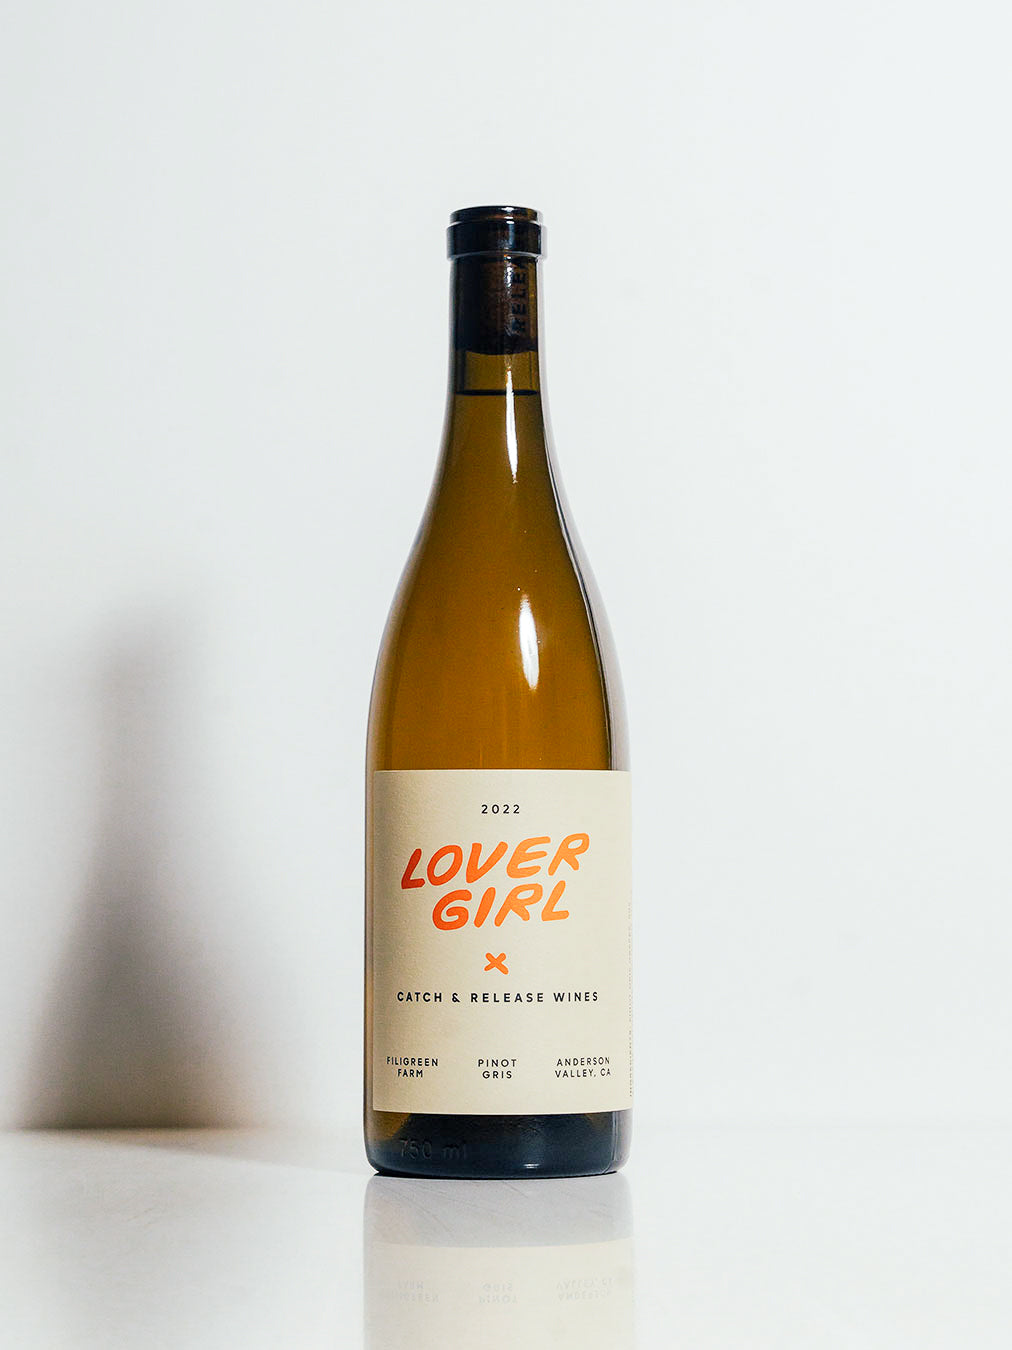 Catch & Release Wines 2022 Lover Girl Pinot Gris, made from biodynamically farmed Pinot Gris.